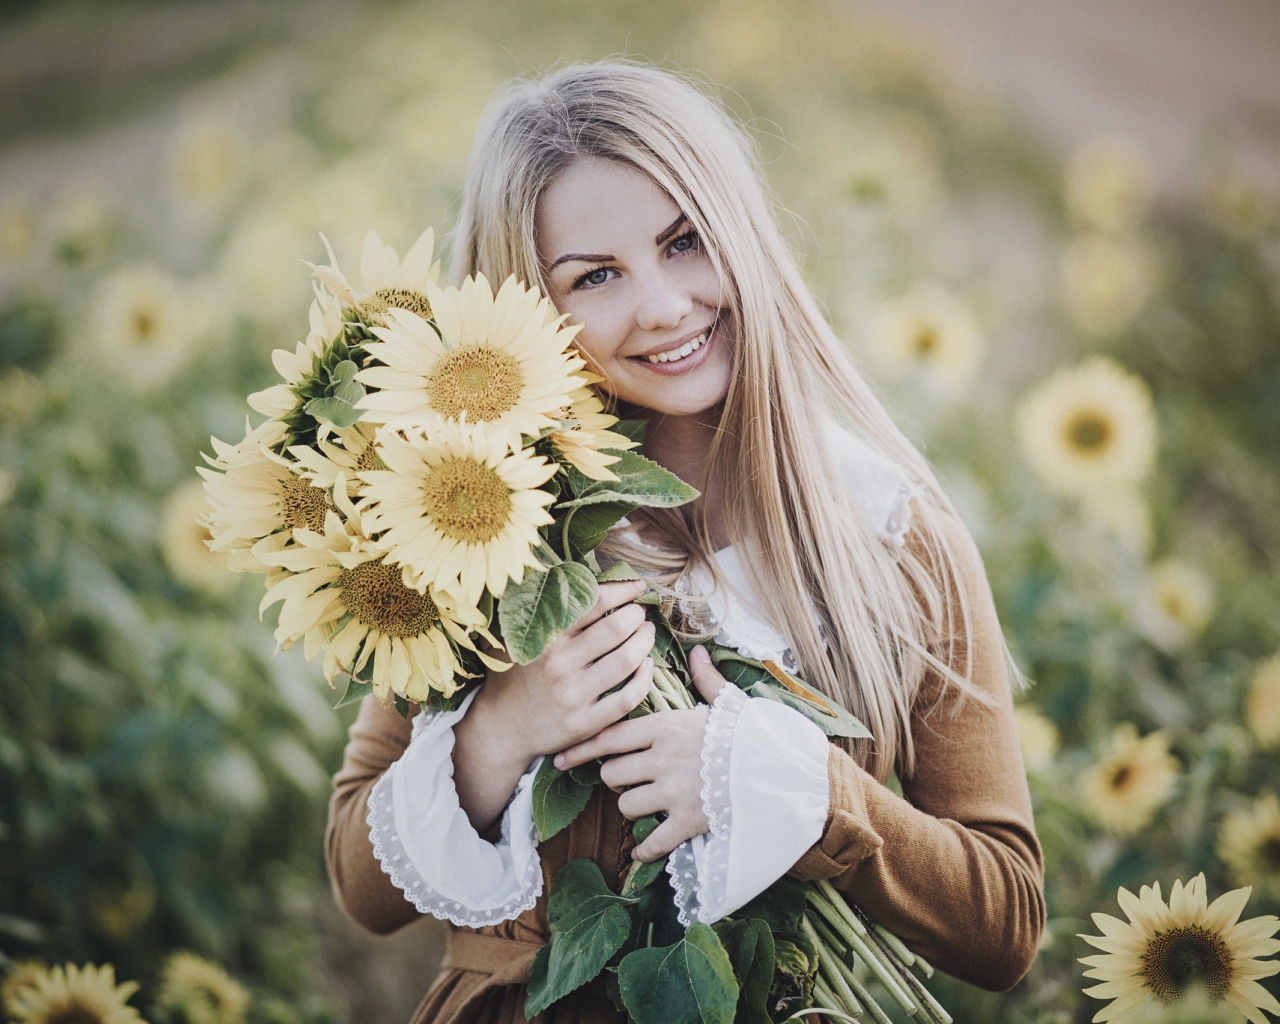 Lovely smiling girl with a bouquet of flowers of a sunflower